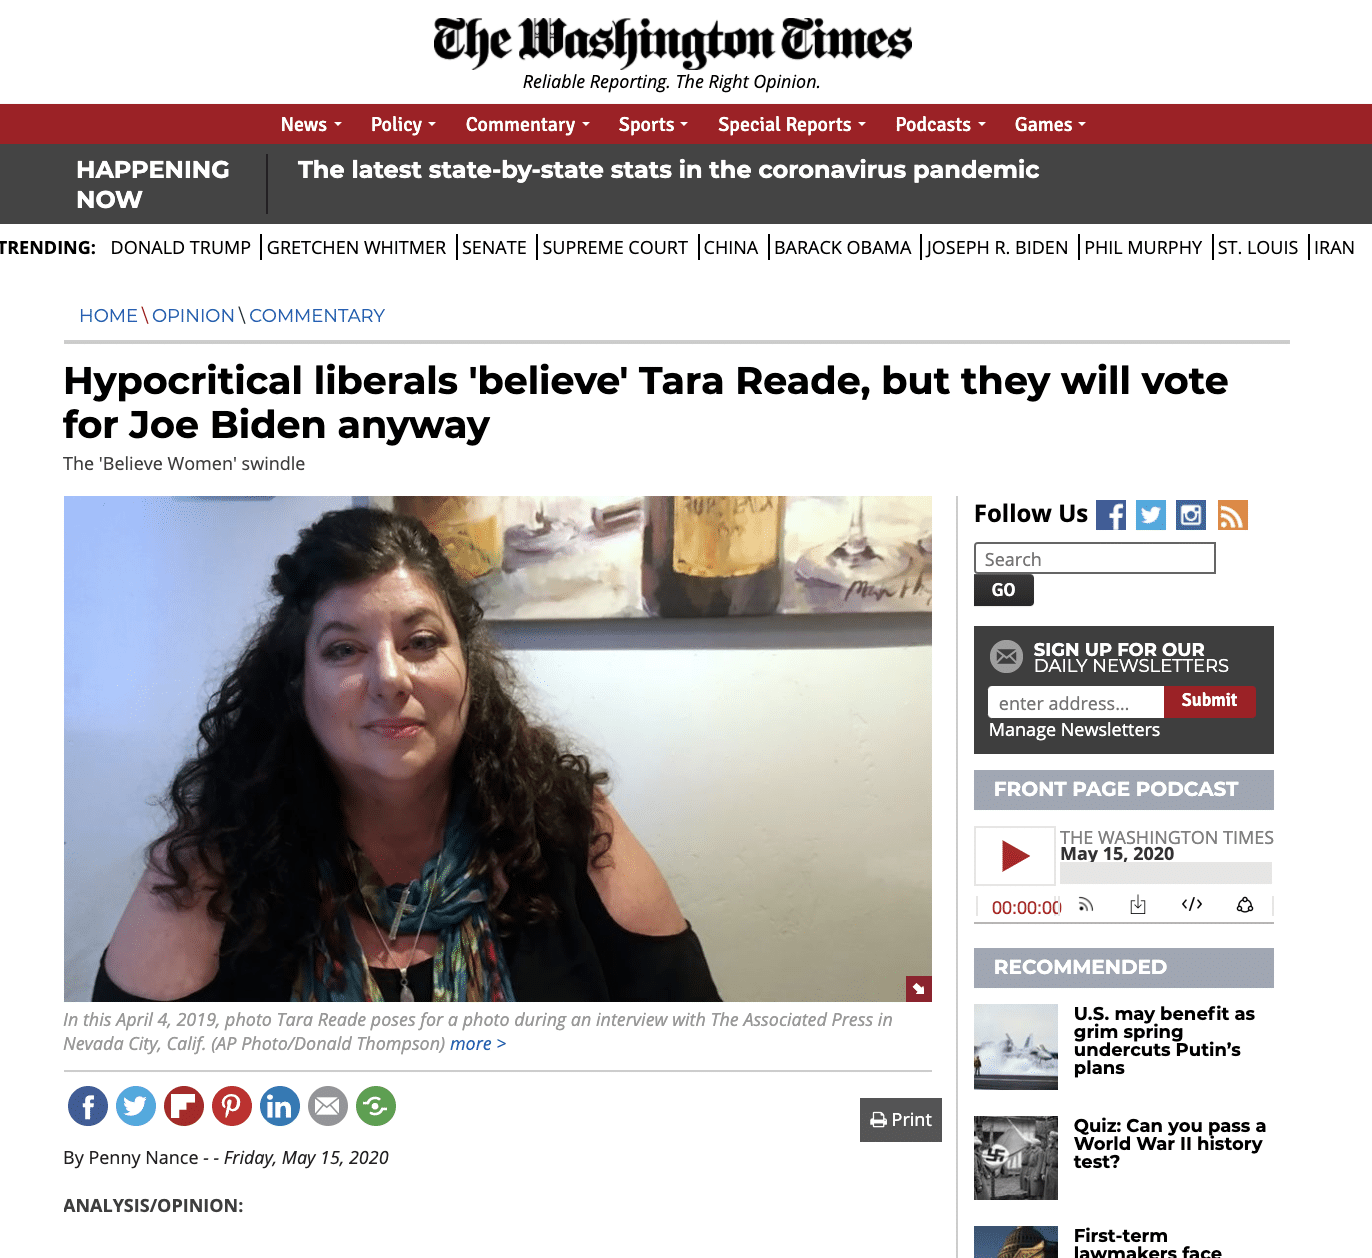 Penny Nance: Hypocritical Liberals ‘Believe’ Tara Reade, But They Will Vote for Joe Biden Anyway